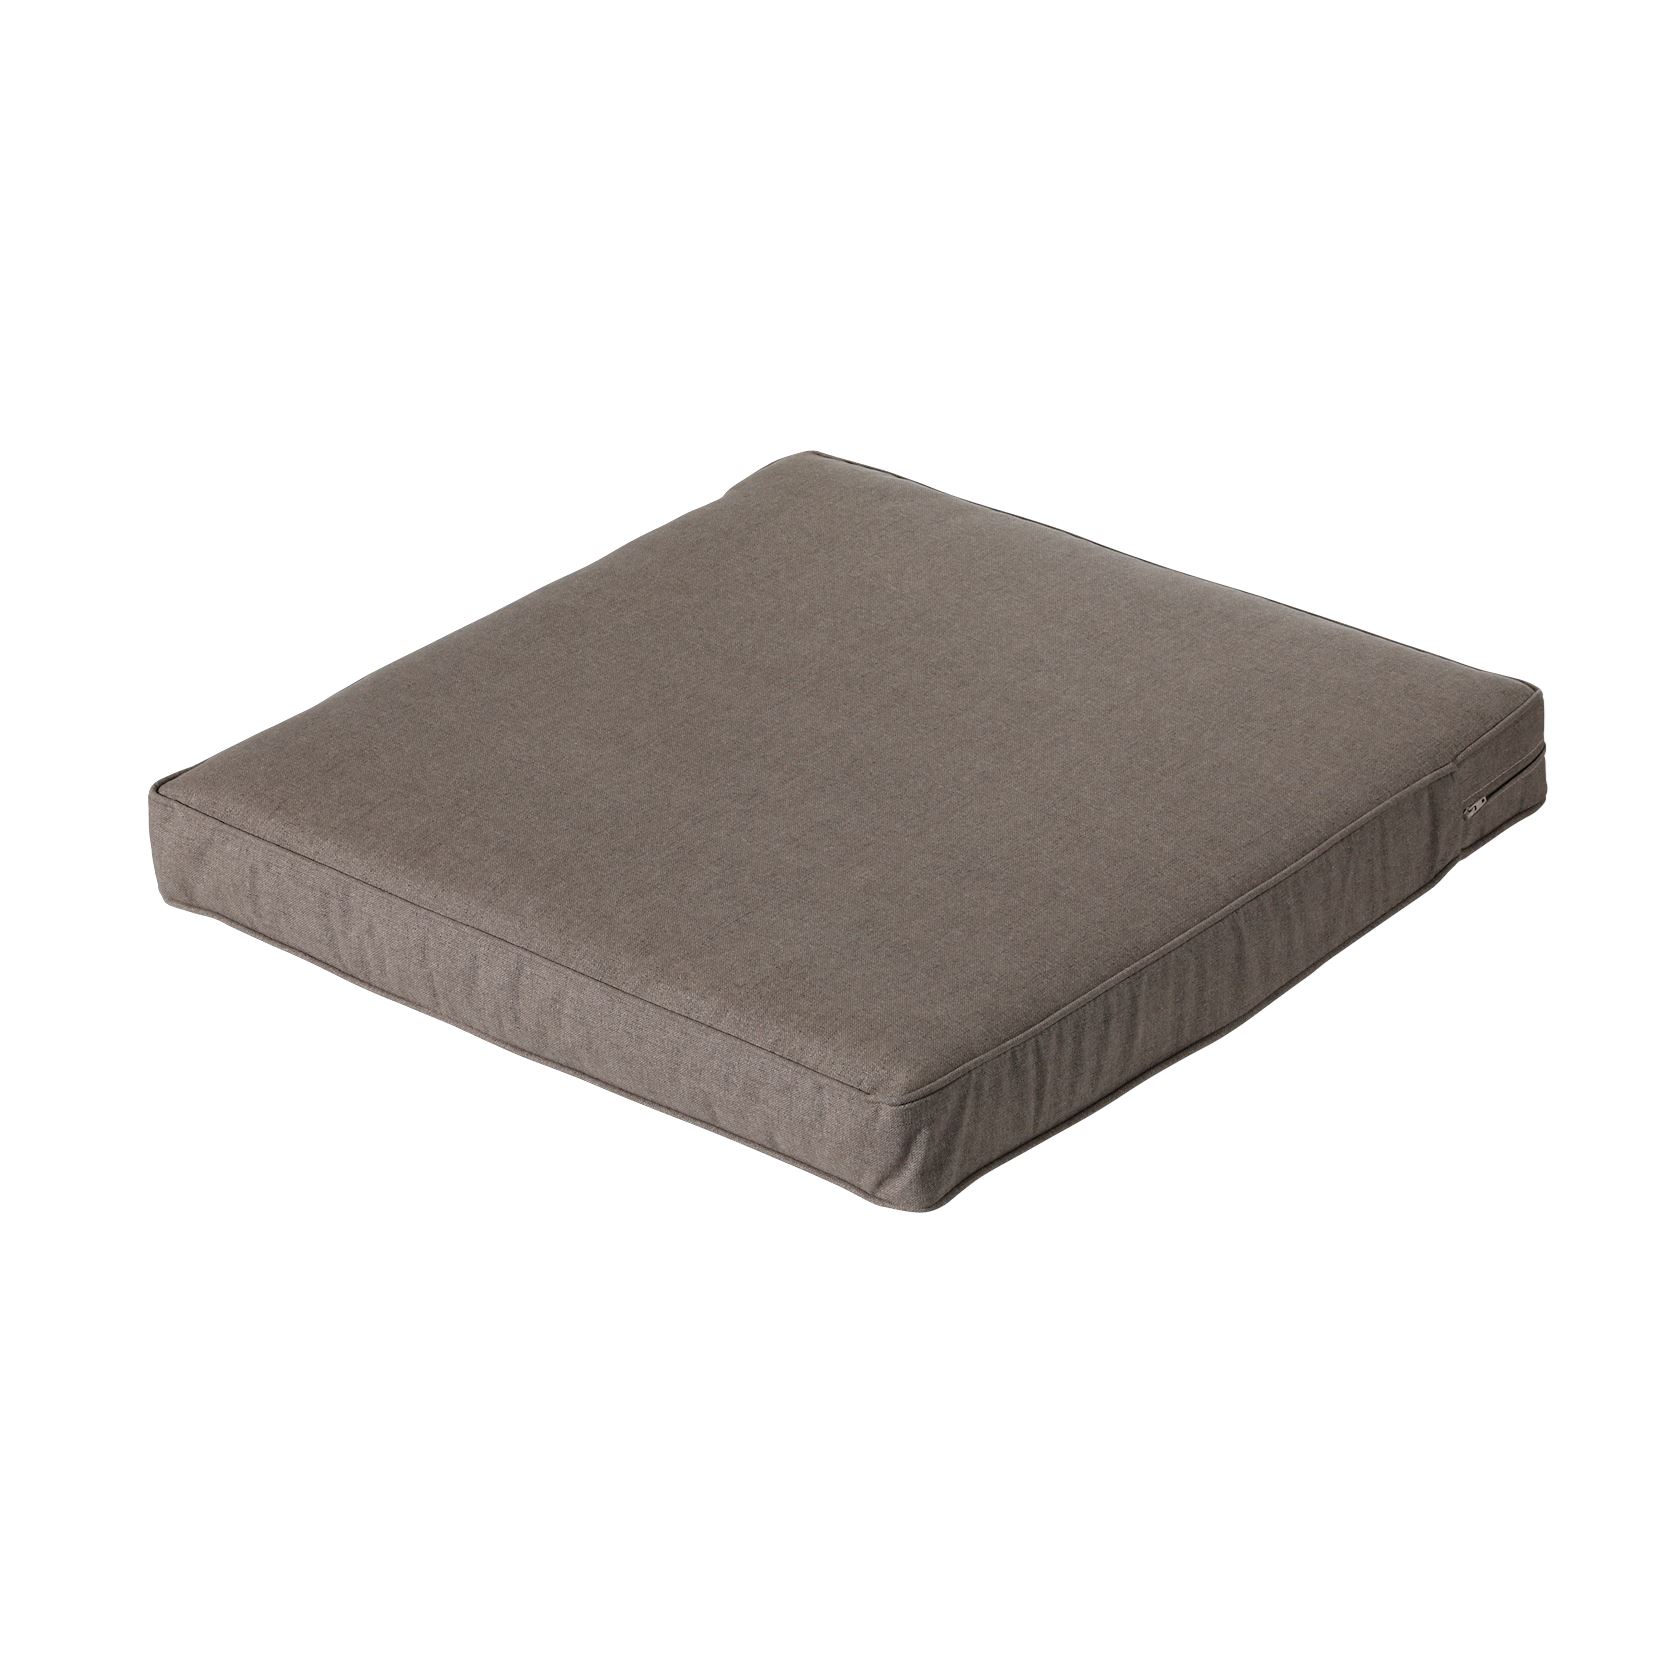 Lounge-luxe-60x60-OUTDOOR-Oxford-taupe